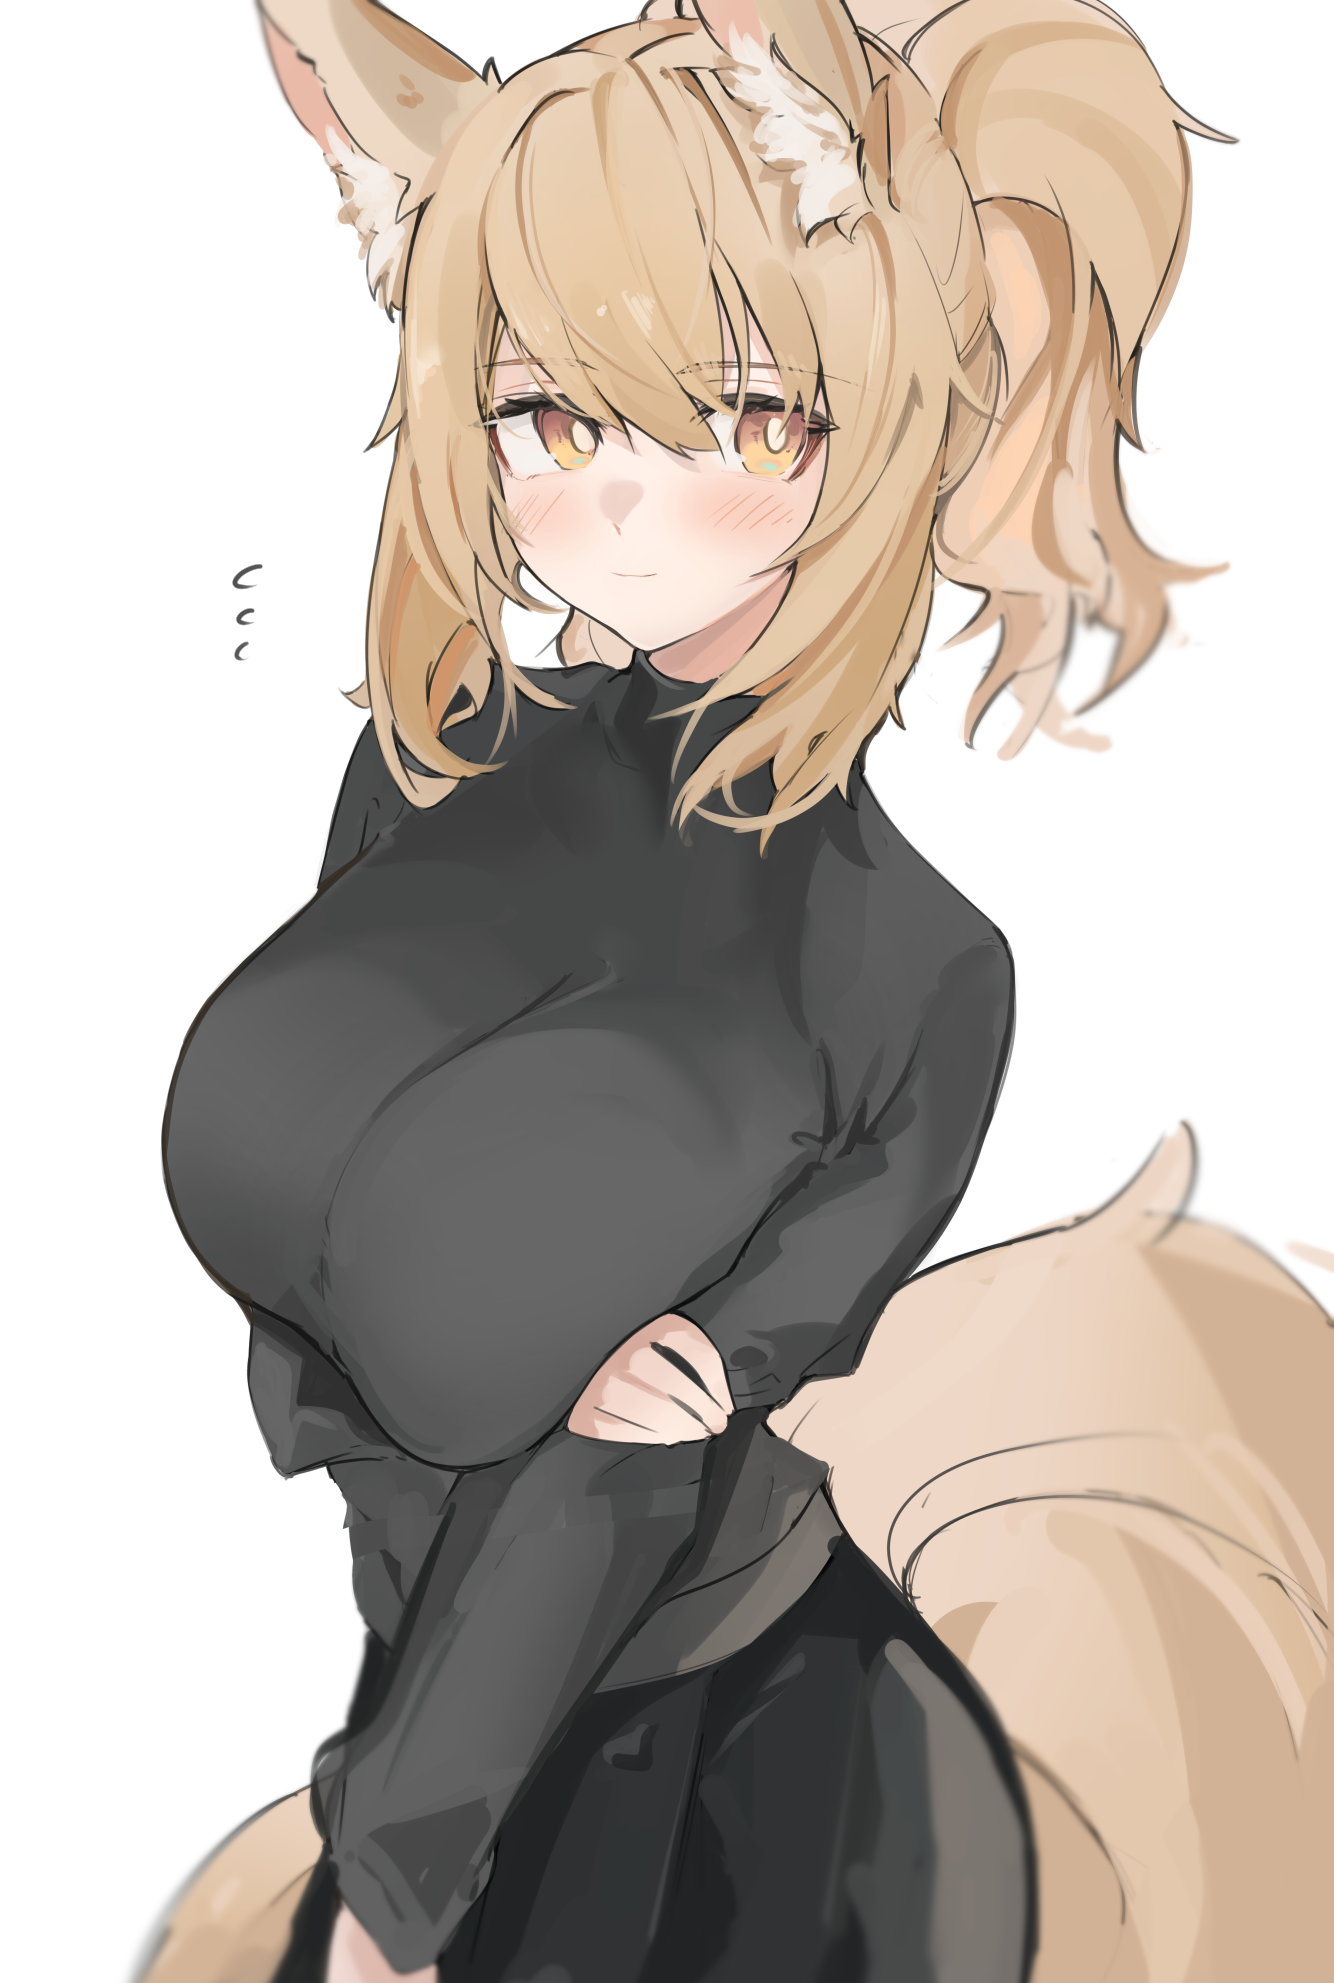 Anime 1334x1983 Mikojin Arknights anime girls wolf girls wolf ears wolf tail blonde yellow eyes portrait display